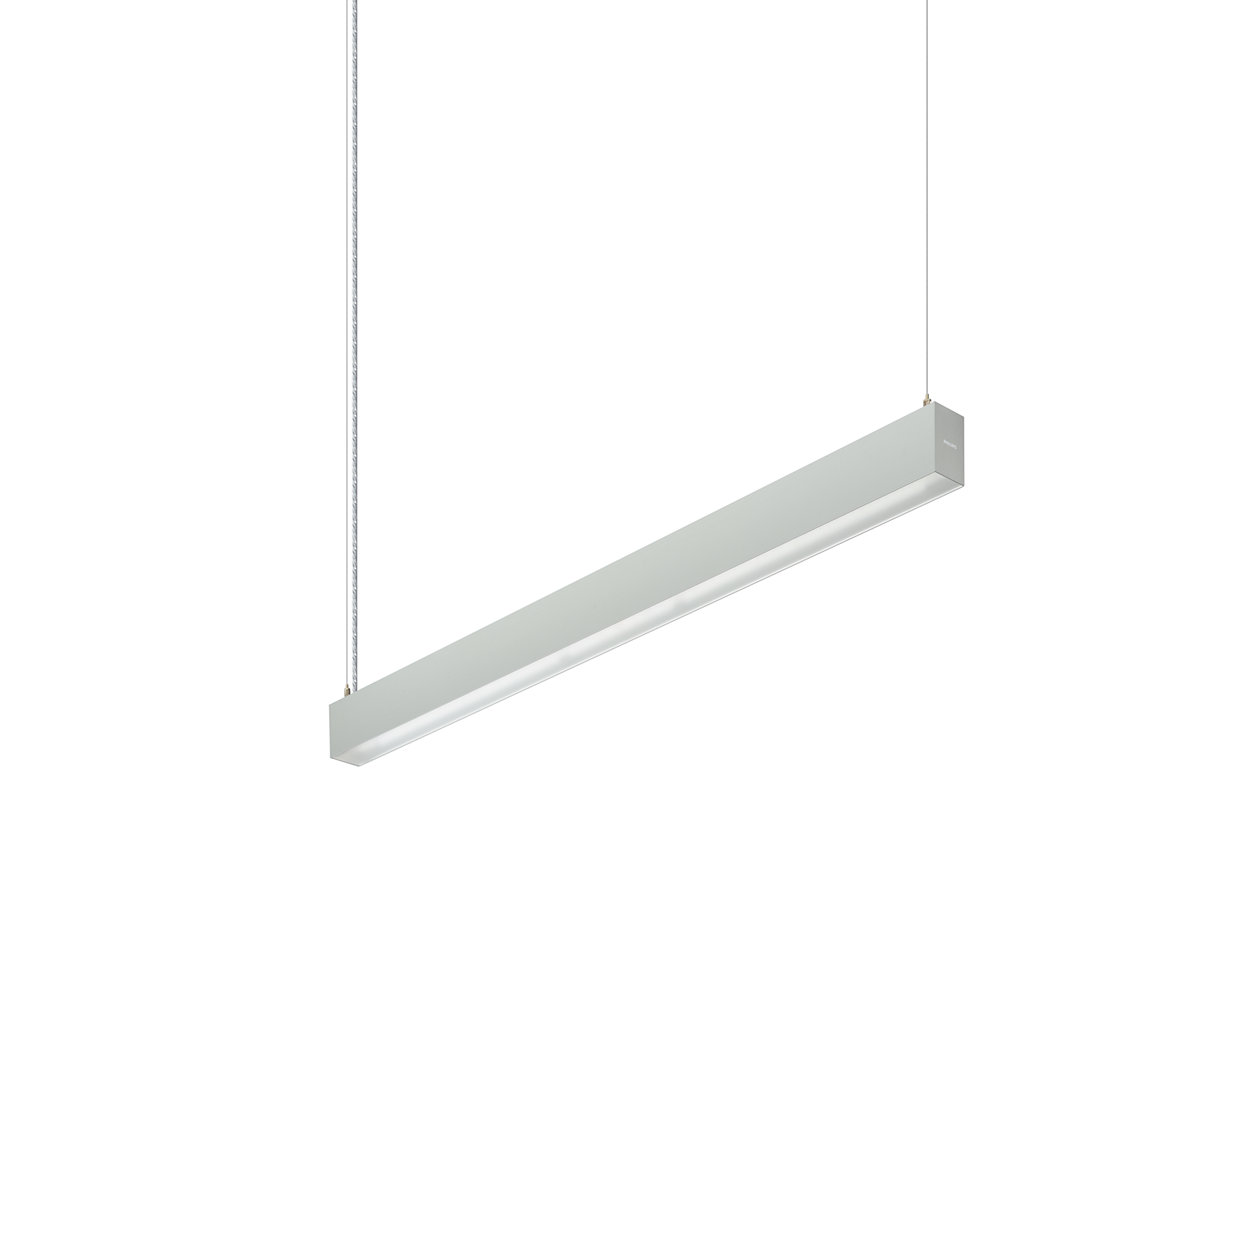 TrueLine, suspended – True line of light: elegant, energy-efficient and compliant with office lighting norms